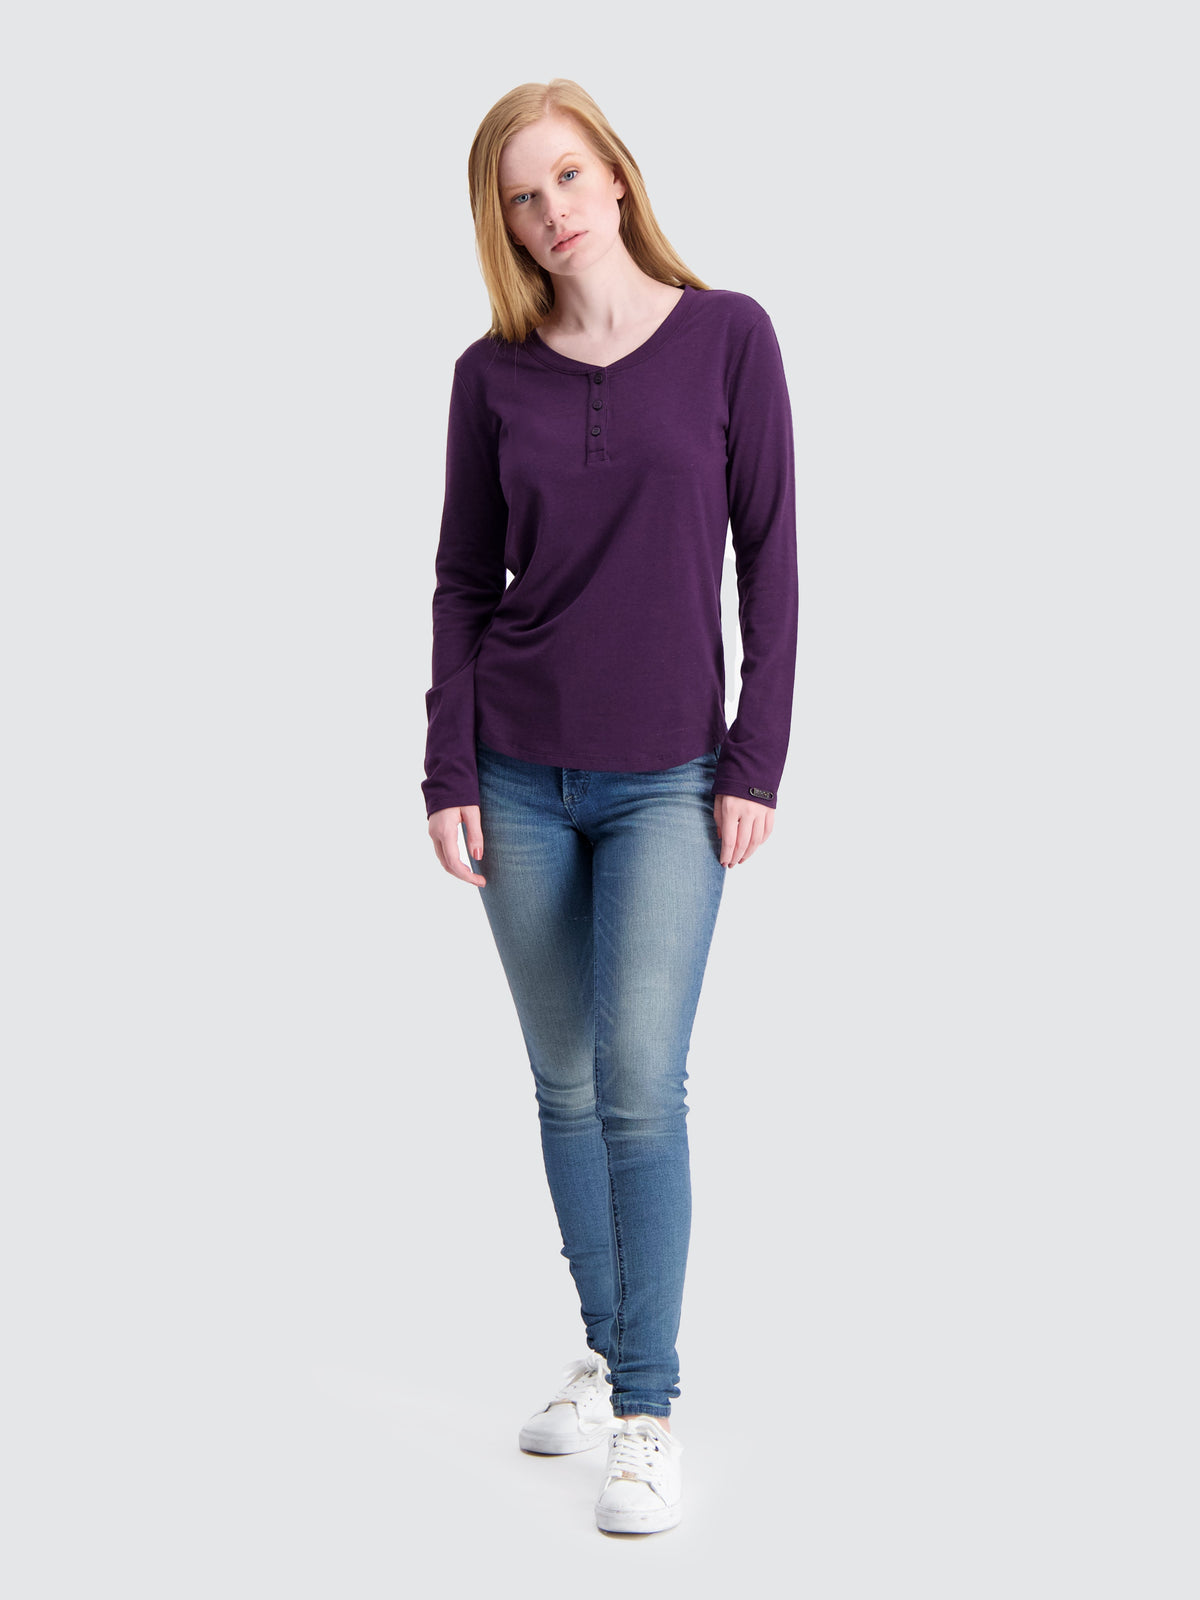 Two Blind Brothers - Womens Women's LS Relaxed Fit Henley Plum